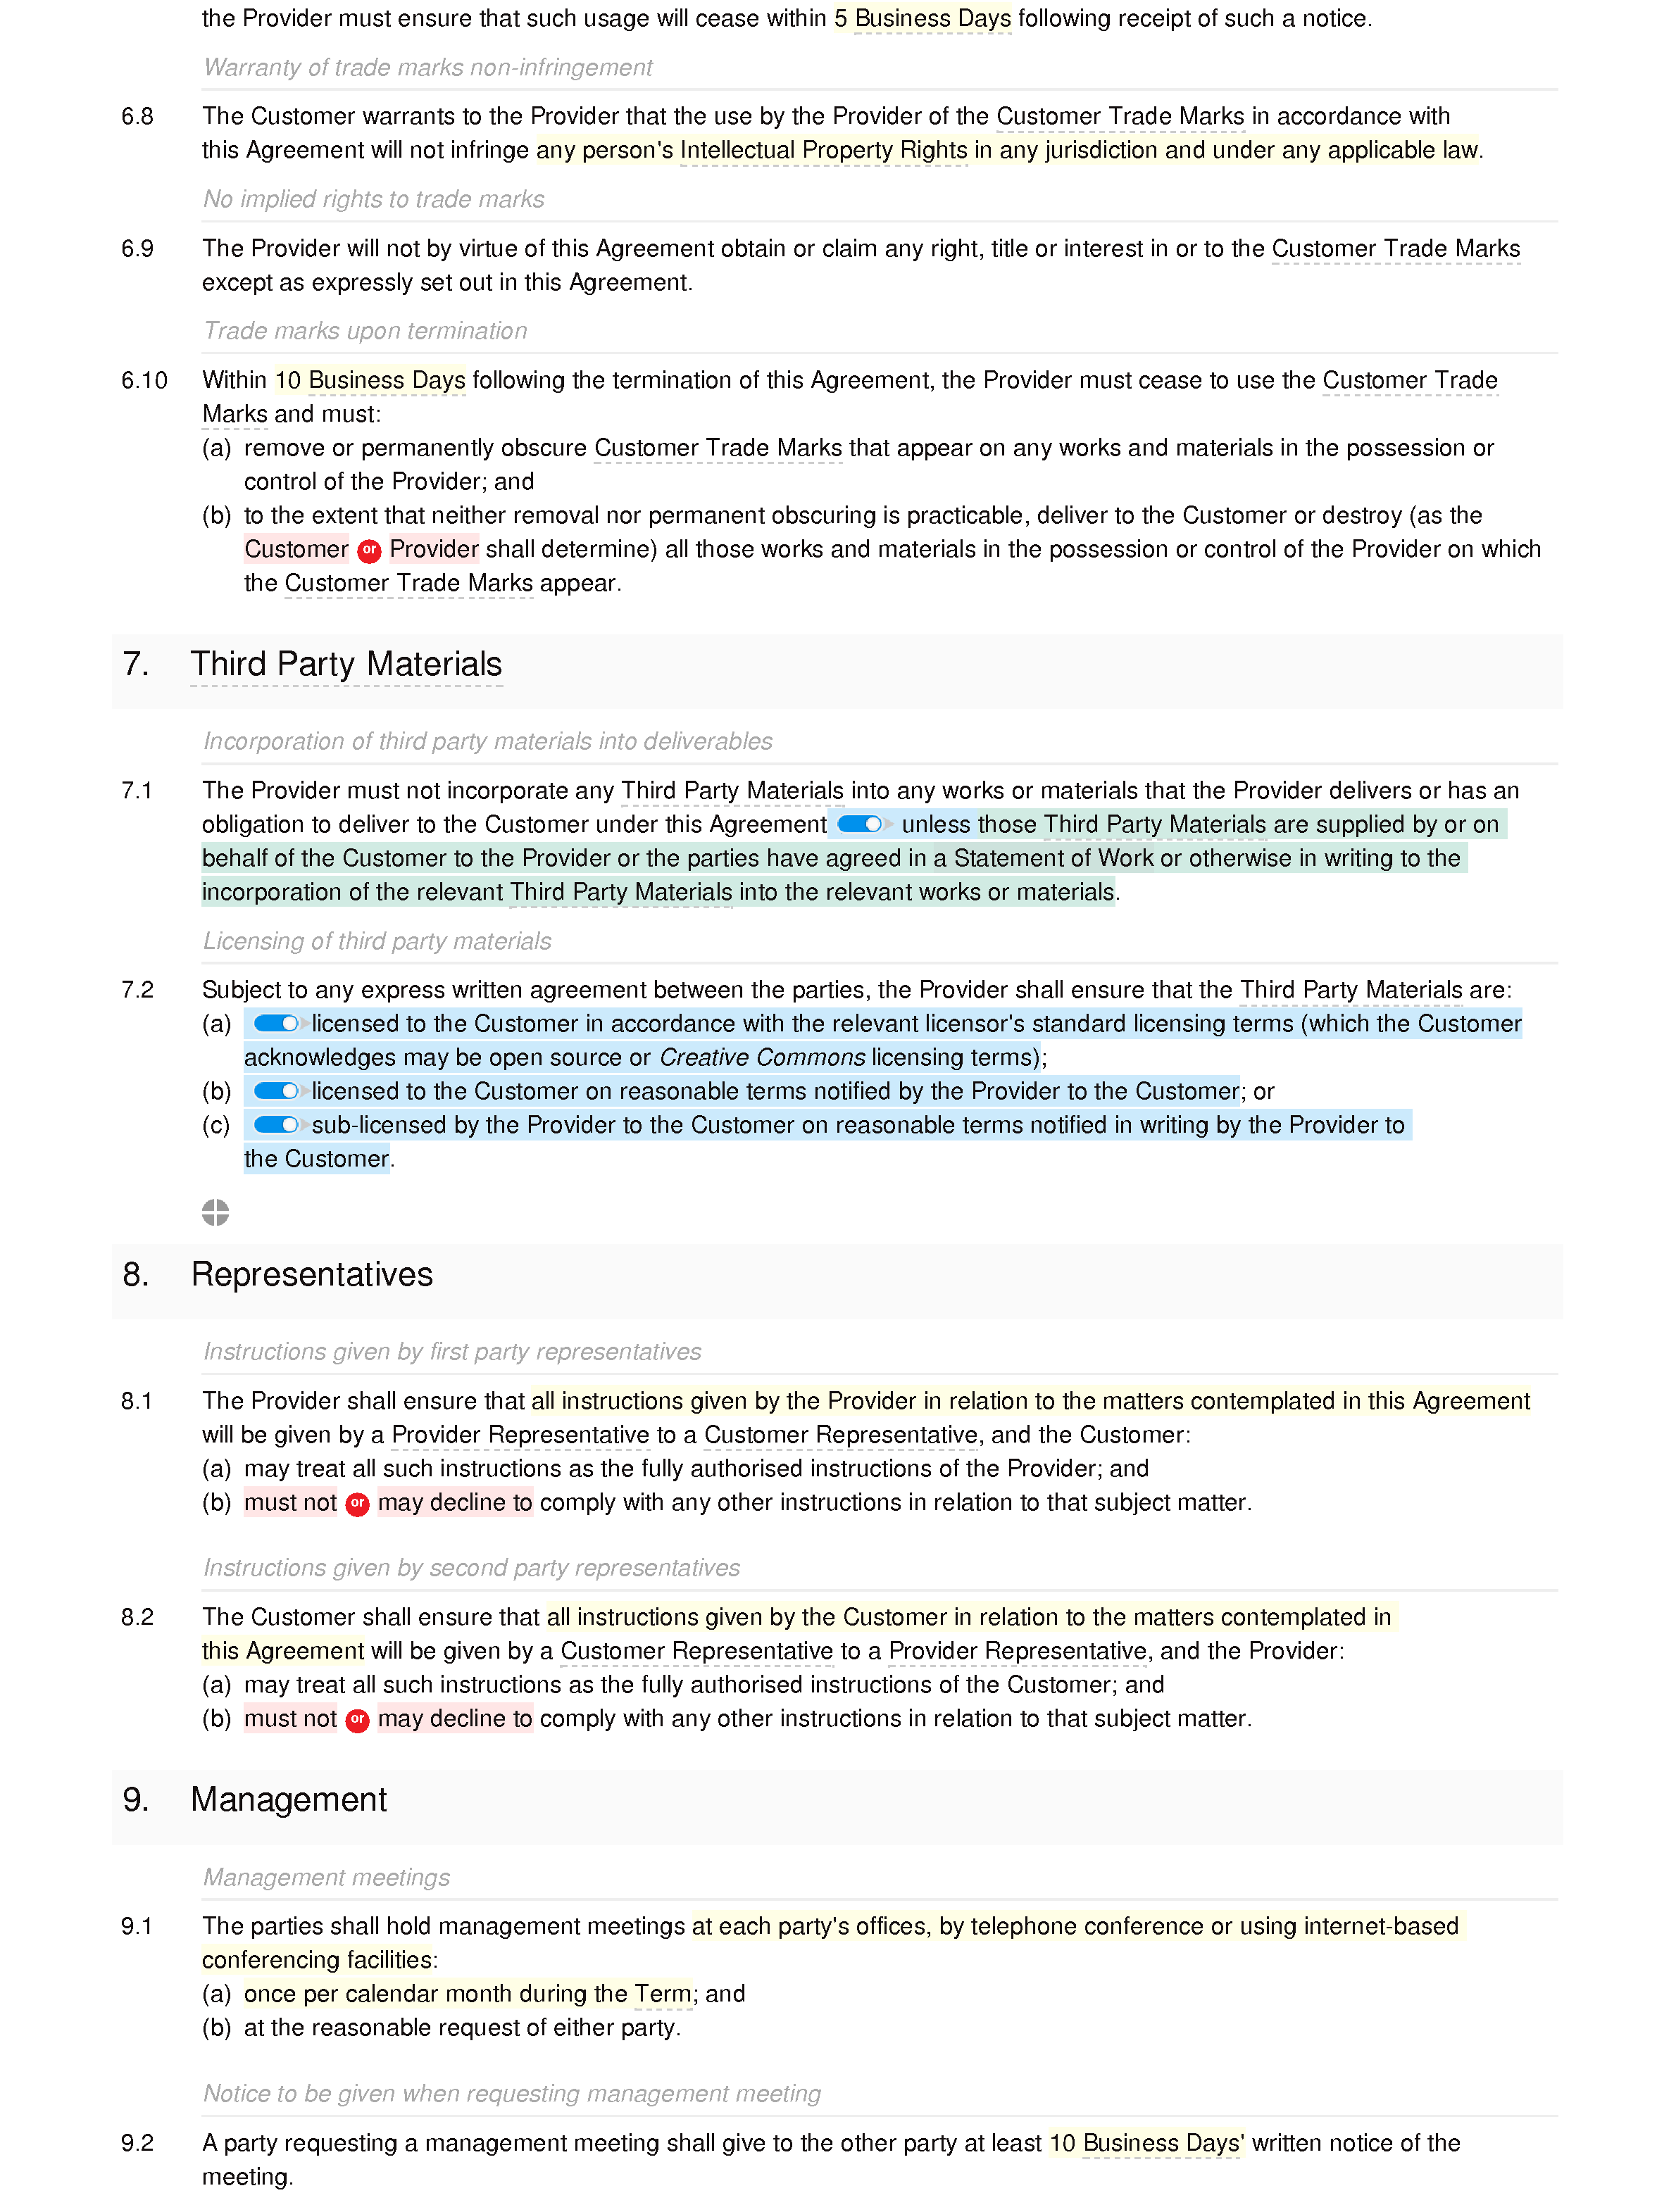 Web services agreement document editor preview